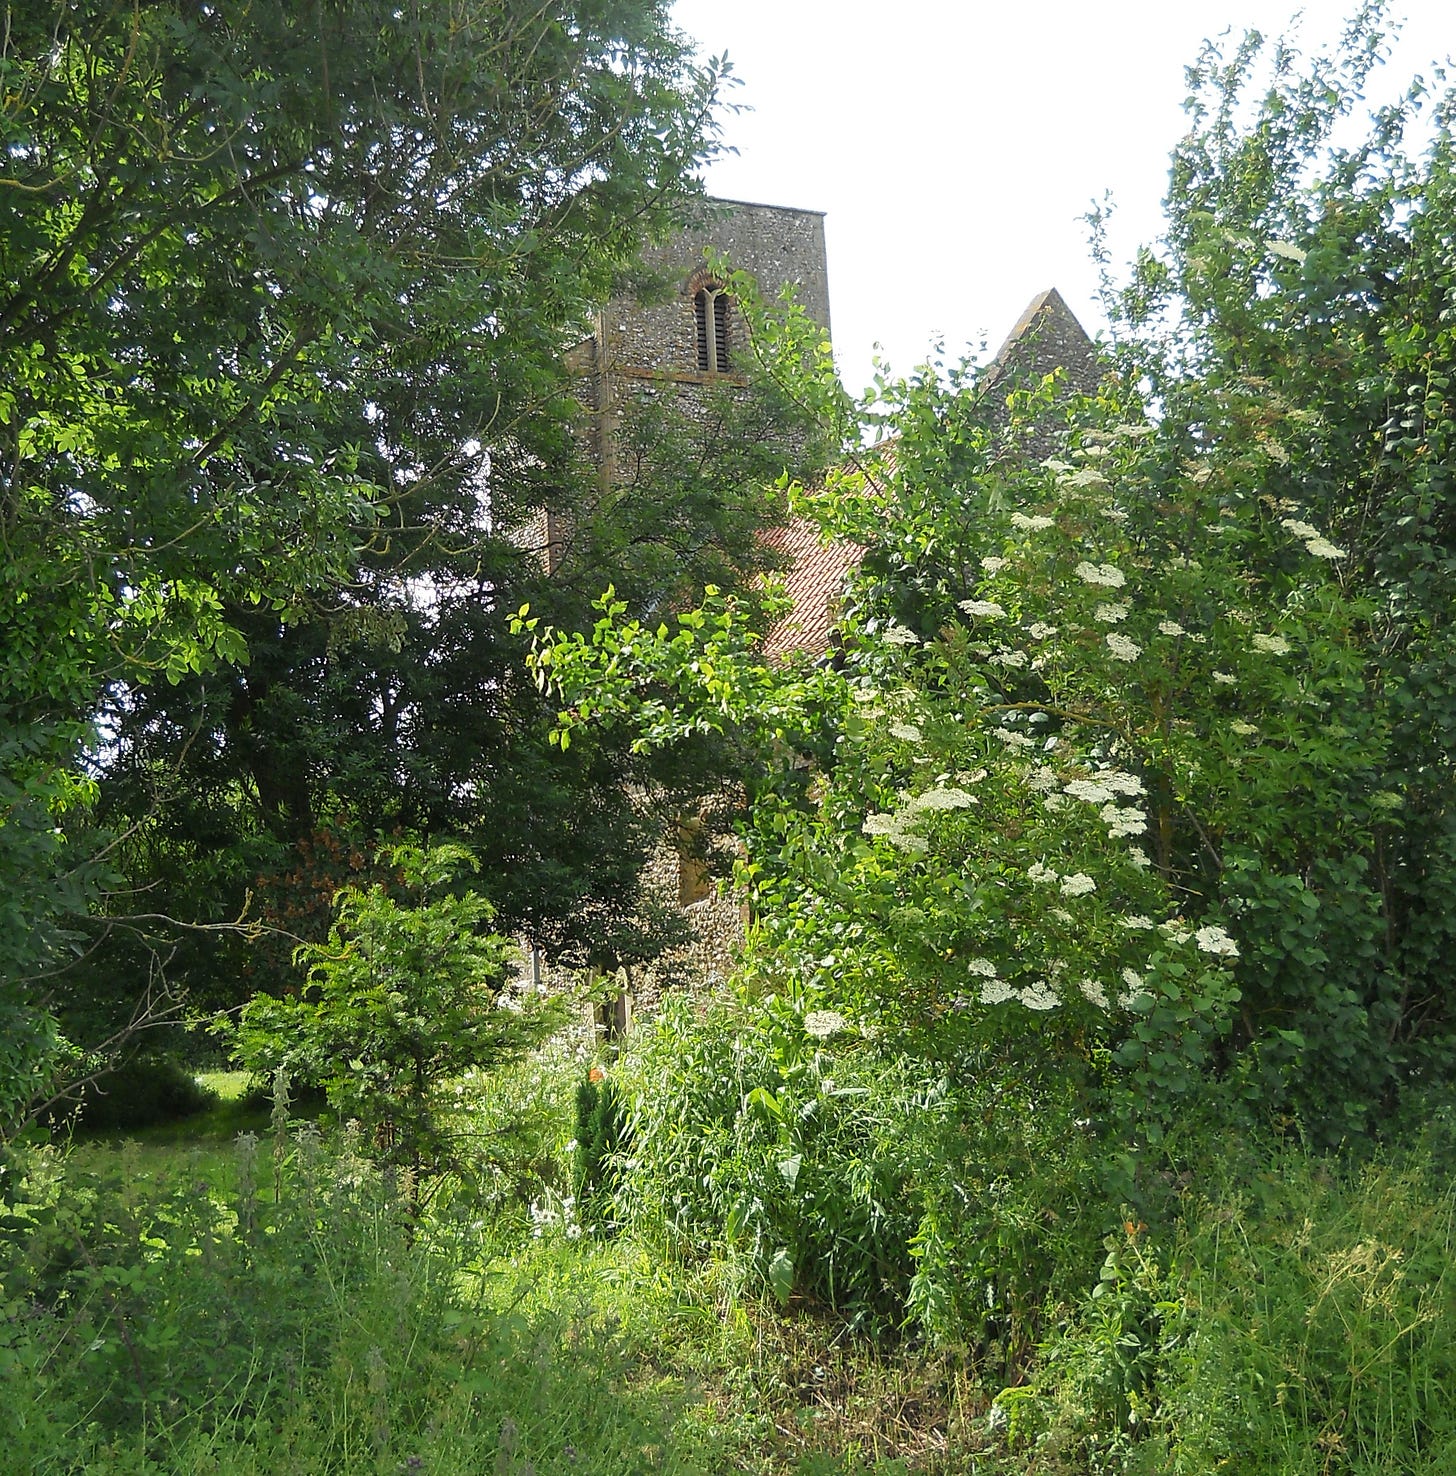 View of the church in recent years. The unruly hedge still prevails.